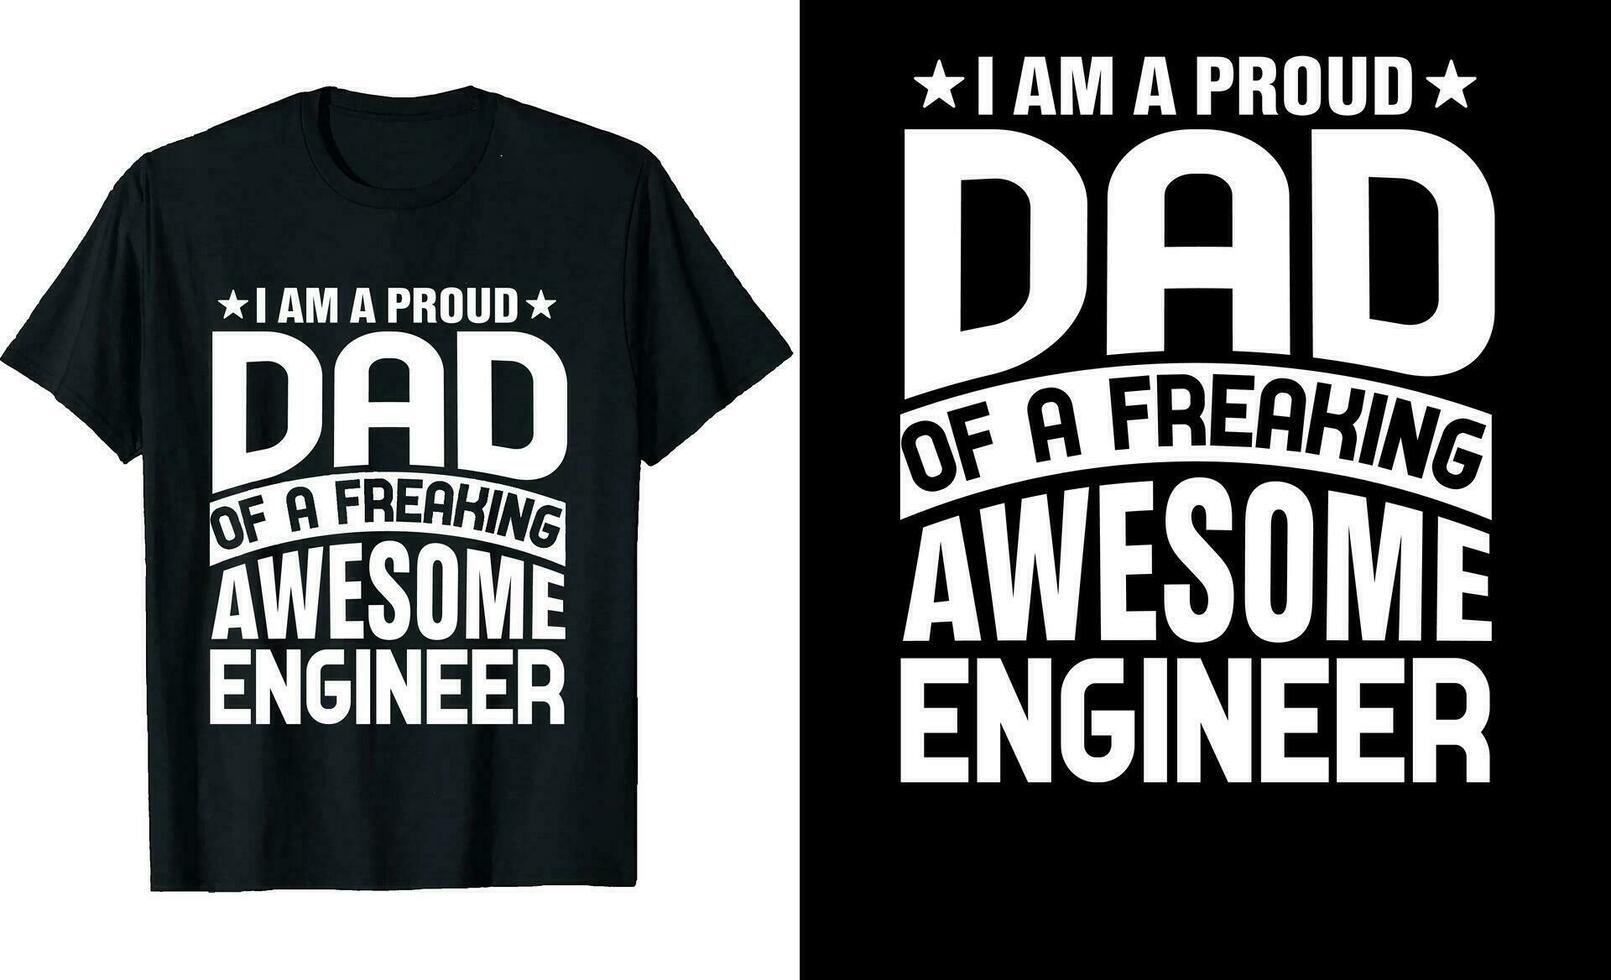 I'm a Proud Dad of a Freaking Awesome Engineer or Dad t shirt design or Engineer t shirt design vector